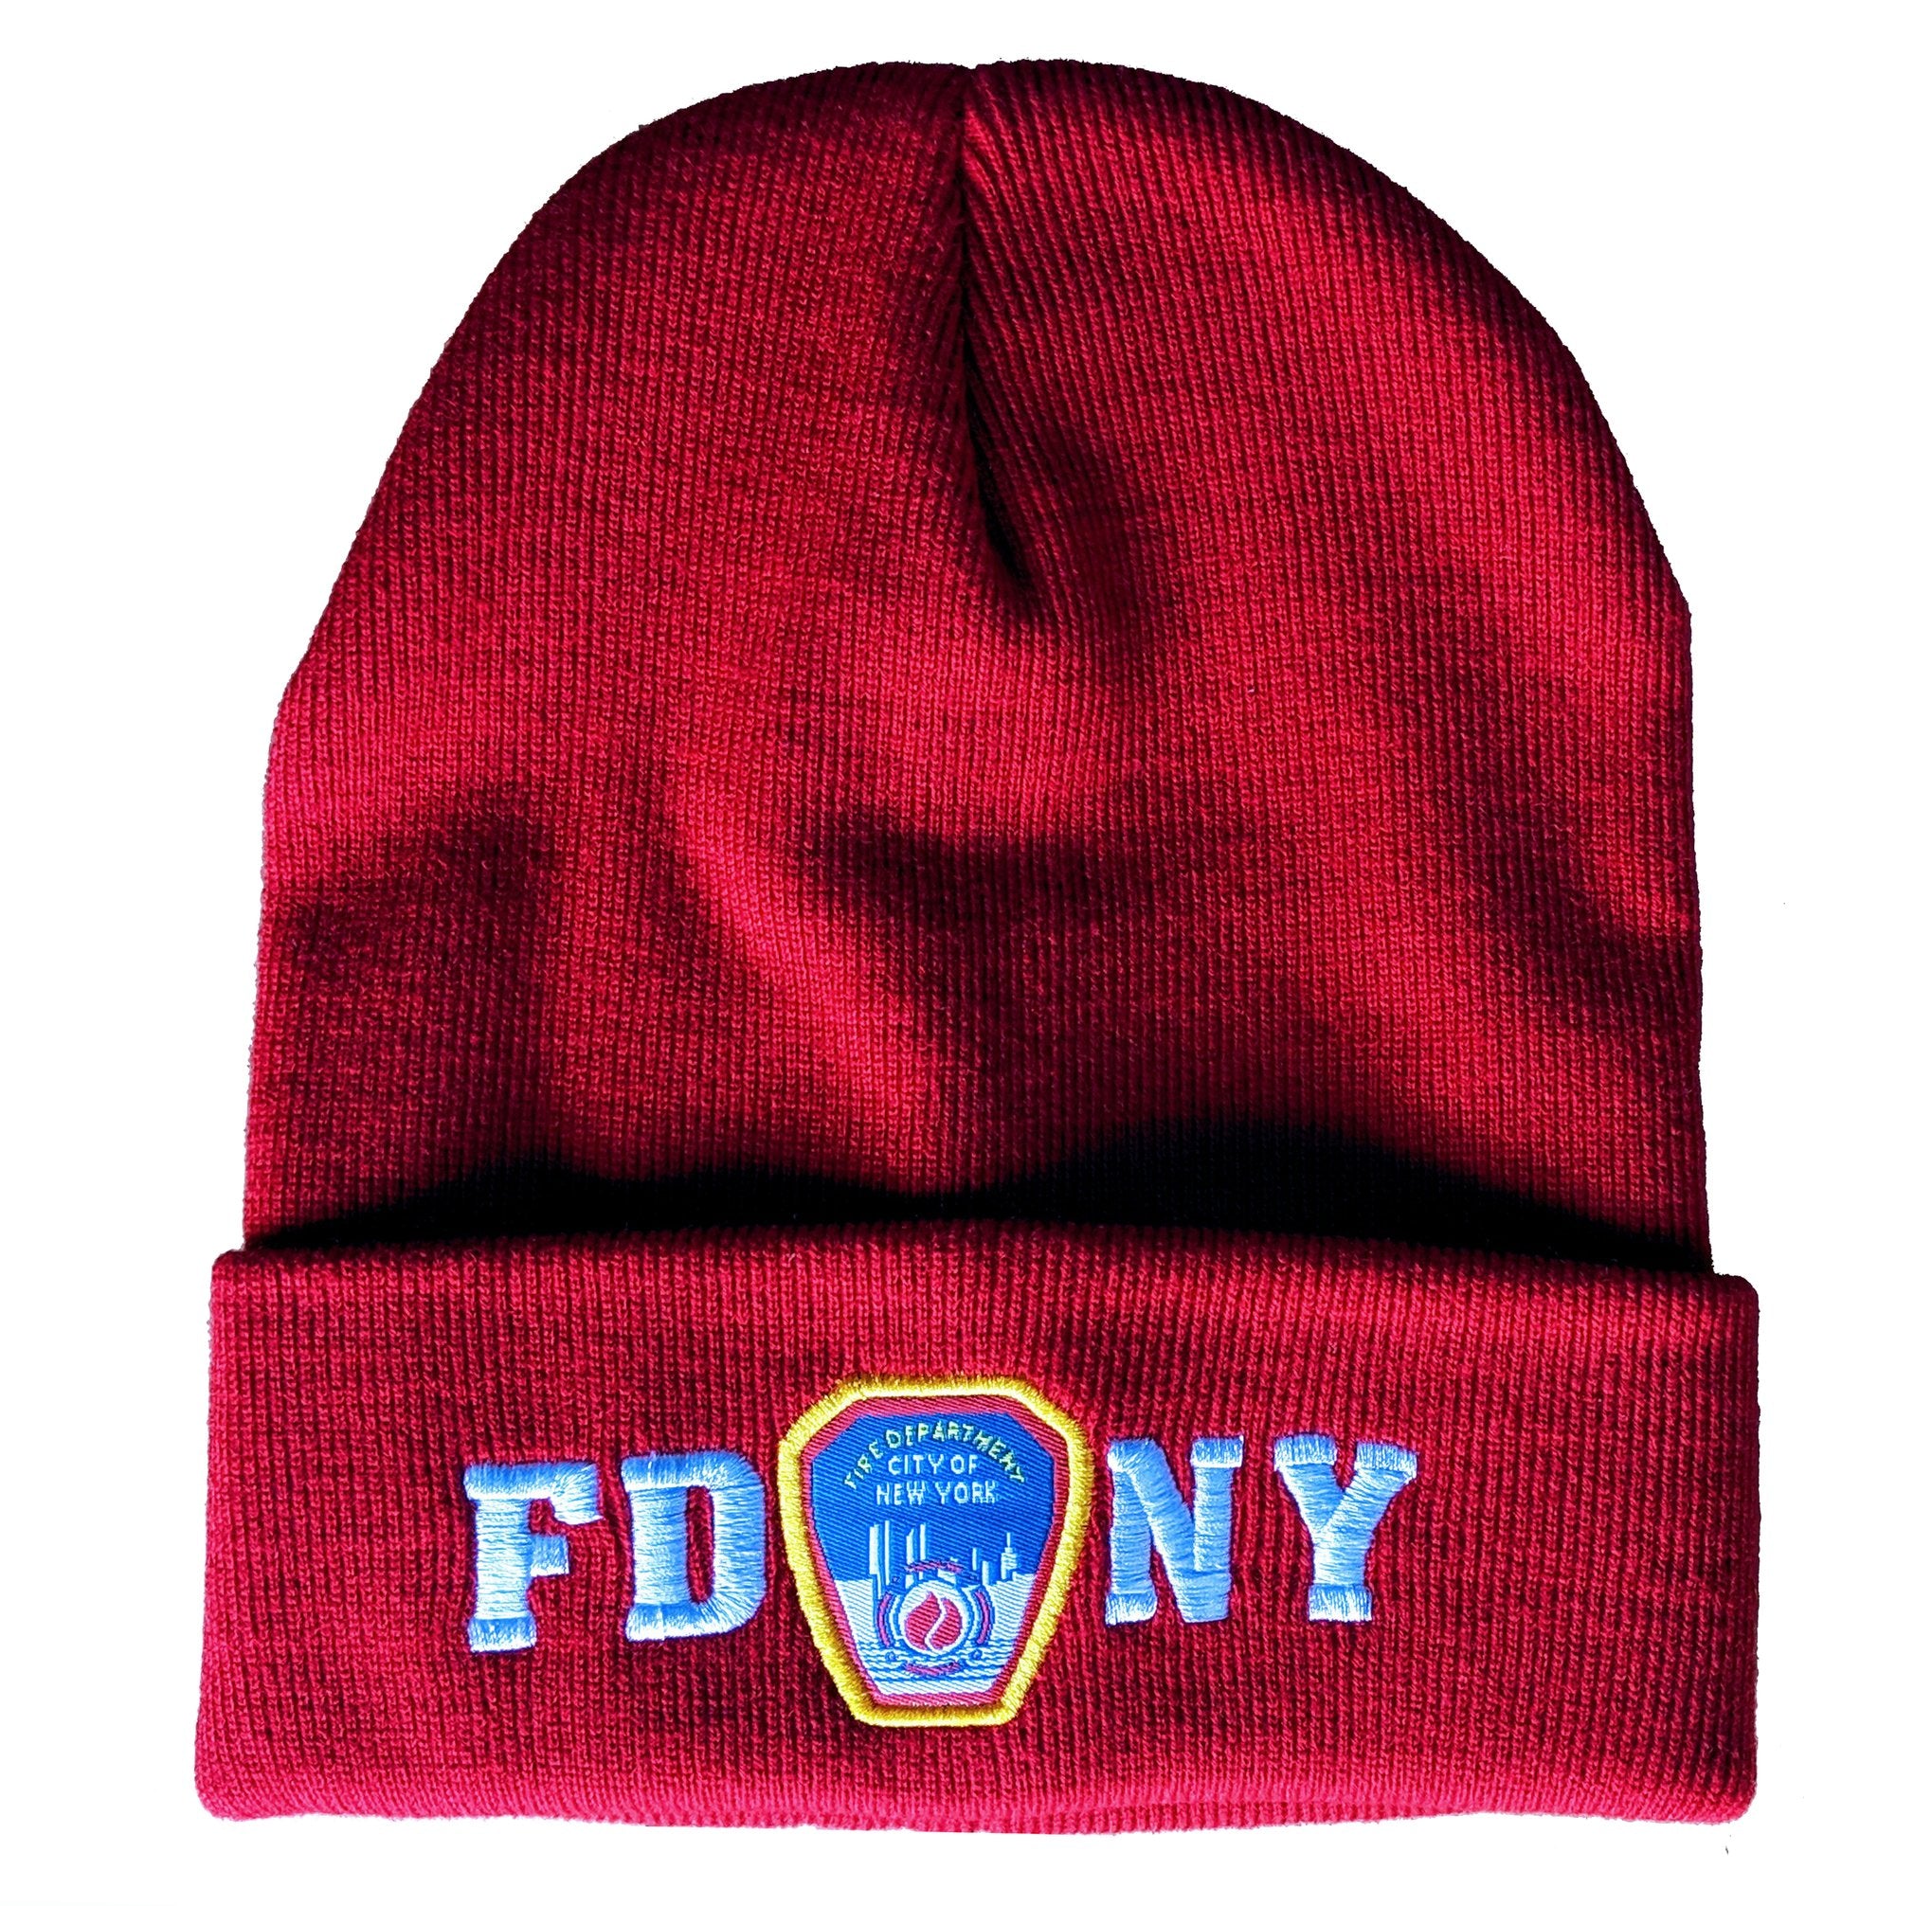 FDNY Winter Hat Beanie Skull Cap Officially Licensed by The New York City Fire Department